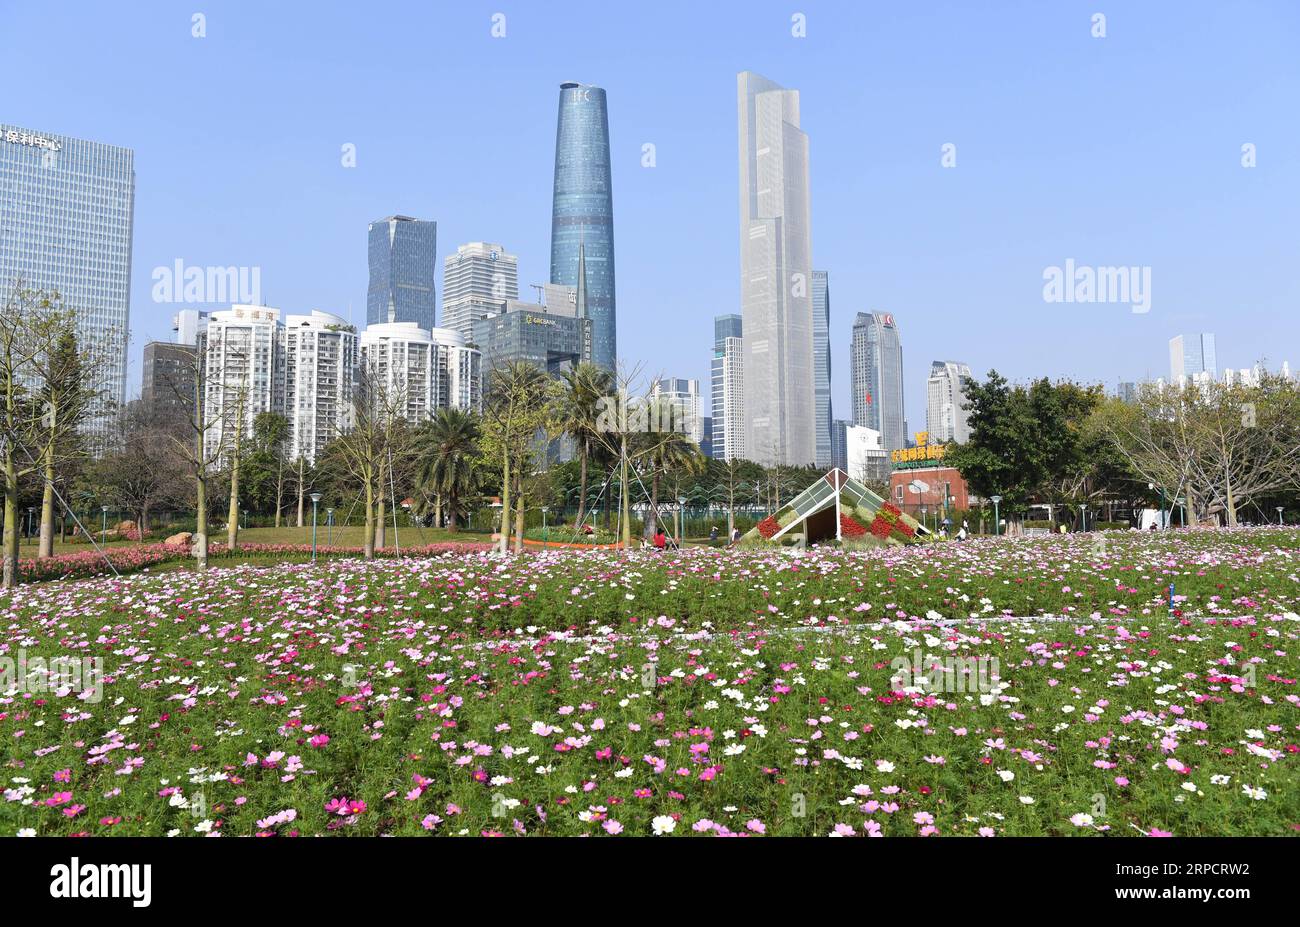 (190712) -- BEIJING, July 12, 2019 -- Photo taken on March 3, 2019 shows Zhujiang New Town in Guangzhou, capital of south China s Guangdong Province. Located in south China, Guangdong Province faces the South China Sea and borders Hunan and Jiangxi provinces to the north. It boasts the well-known Pearl River Delta, which is composed of three upstream rivers and a large number of islands. Due to the climate, Guangdong is famous for a diversified ecological system and environment. In recent years, by upholding the principle of green development, Guangdong has made remarkable achievements in its Stock Photo